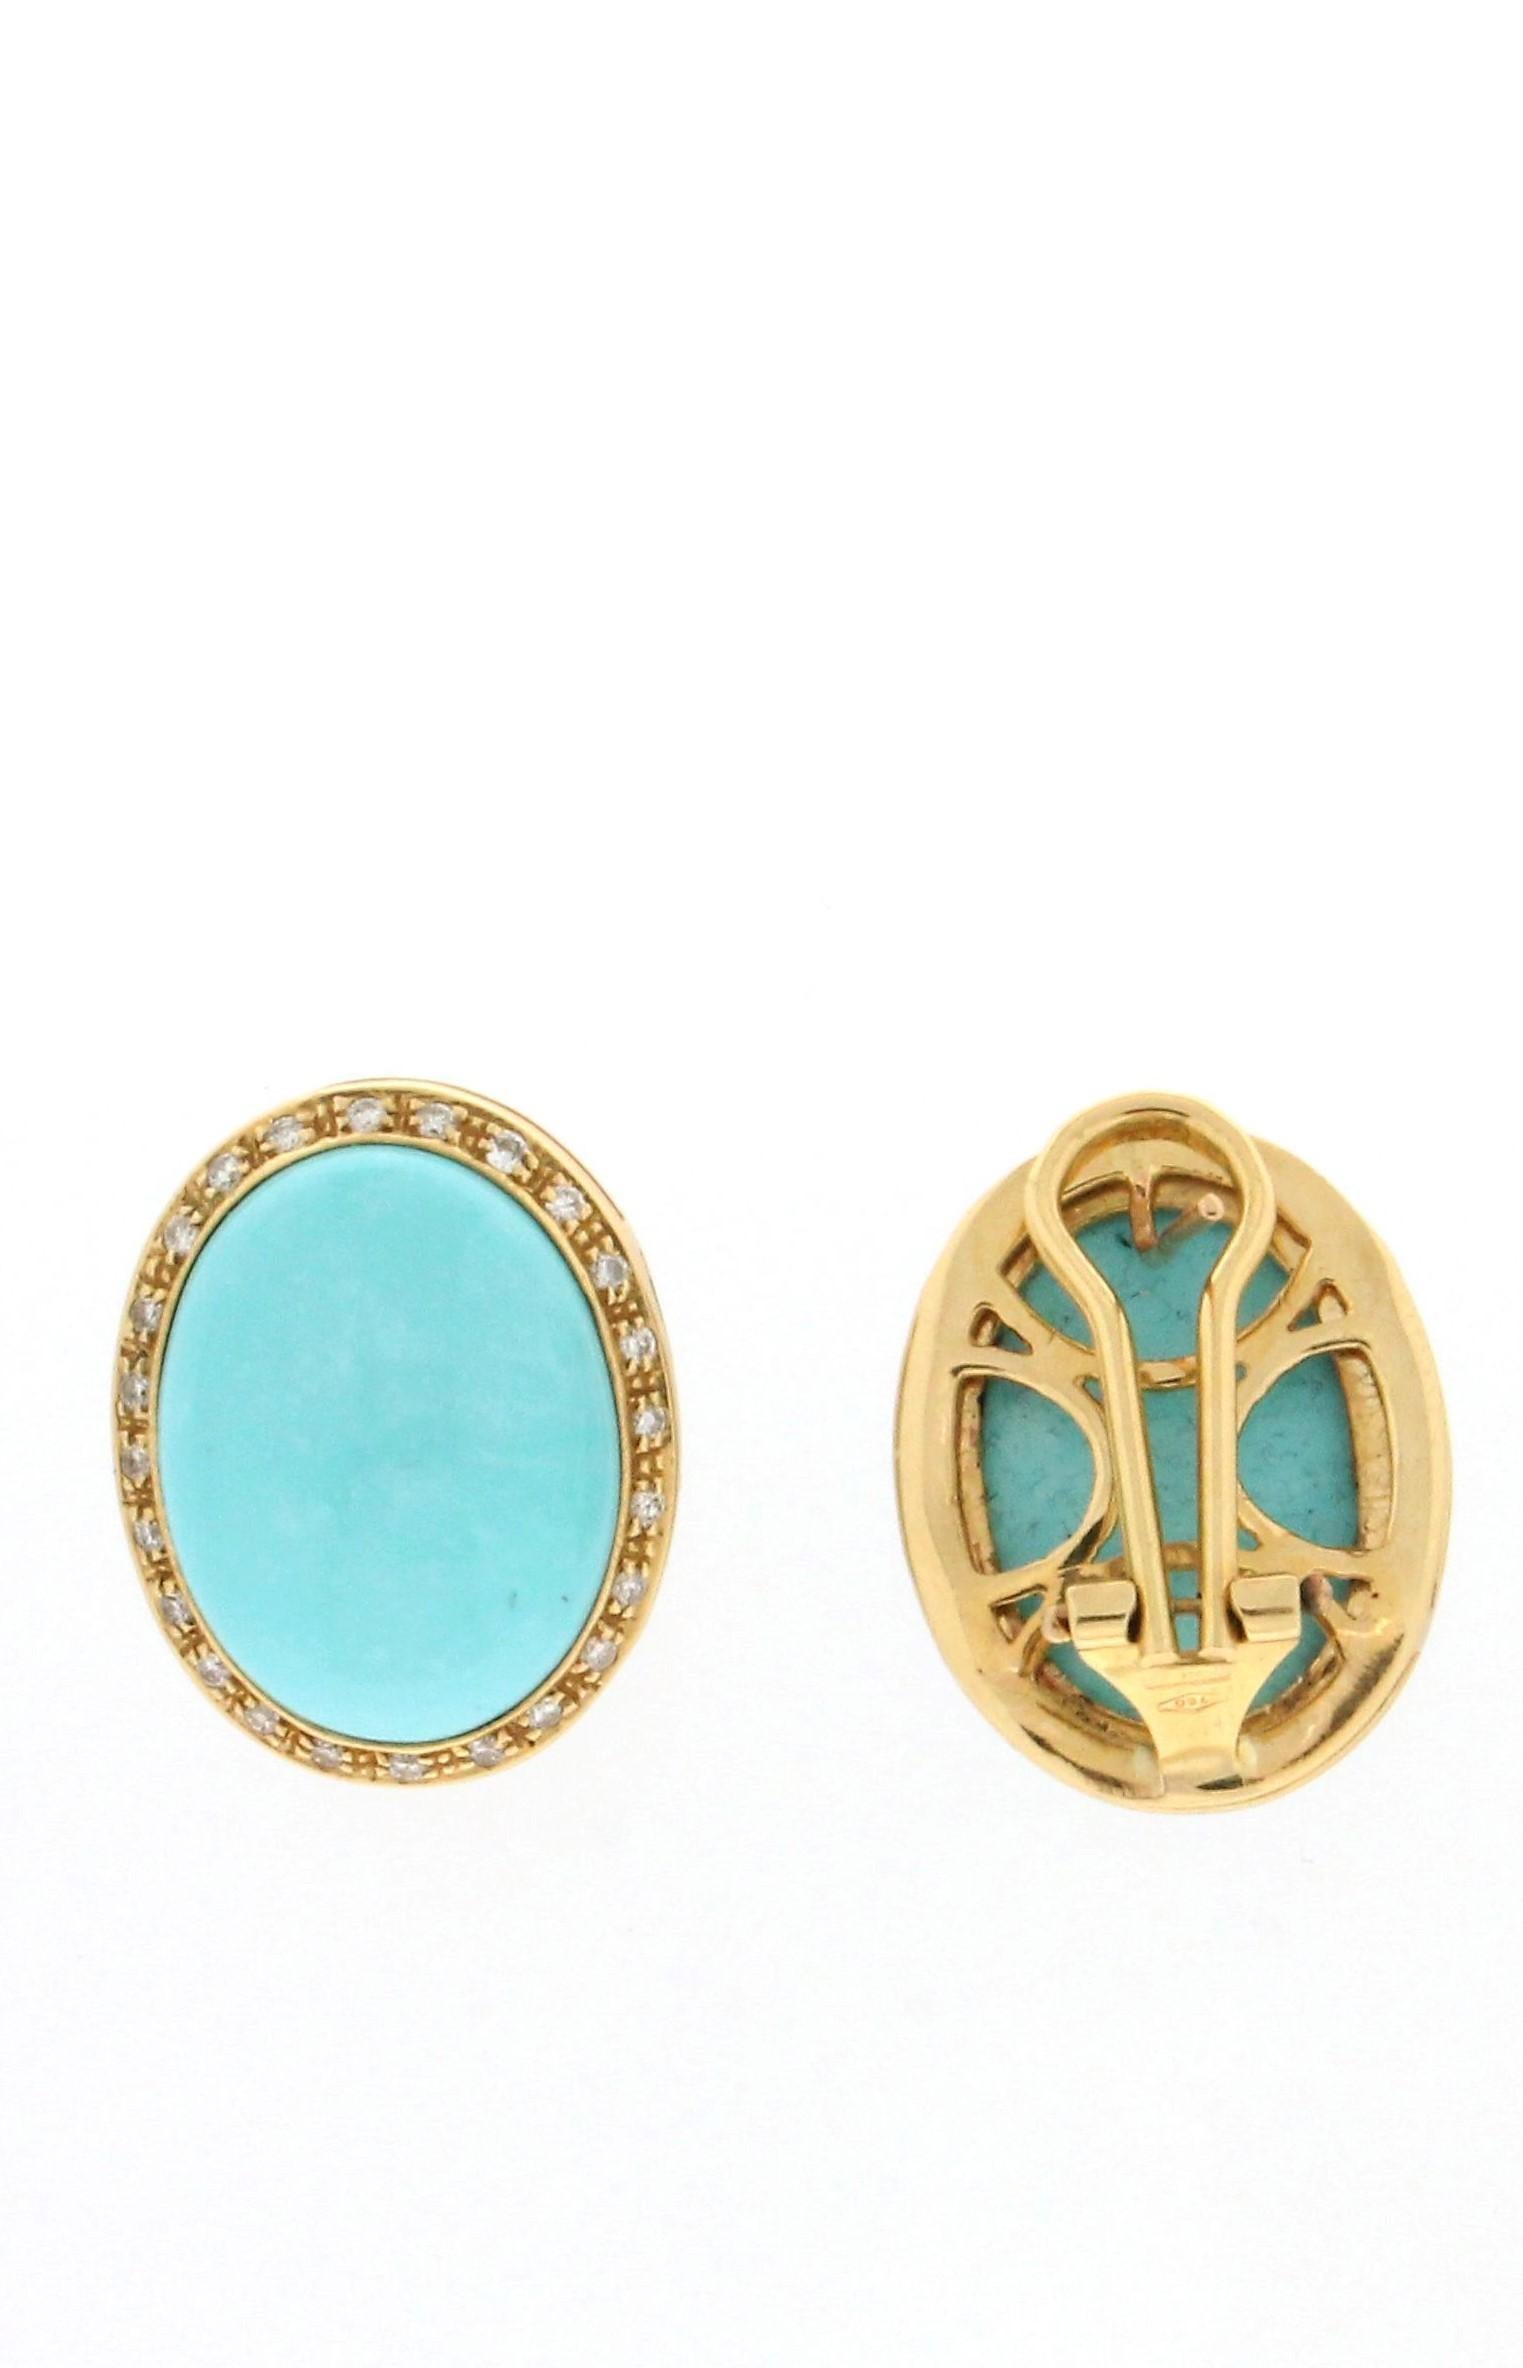 18 Karat yellow gold stud earrings. Handmade by our craftsmen assembled with turquoise and diamonds.

Earrings weight 21.10 grams
Diamonds weight 0.40 karat